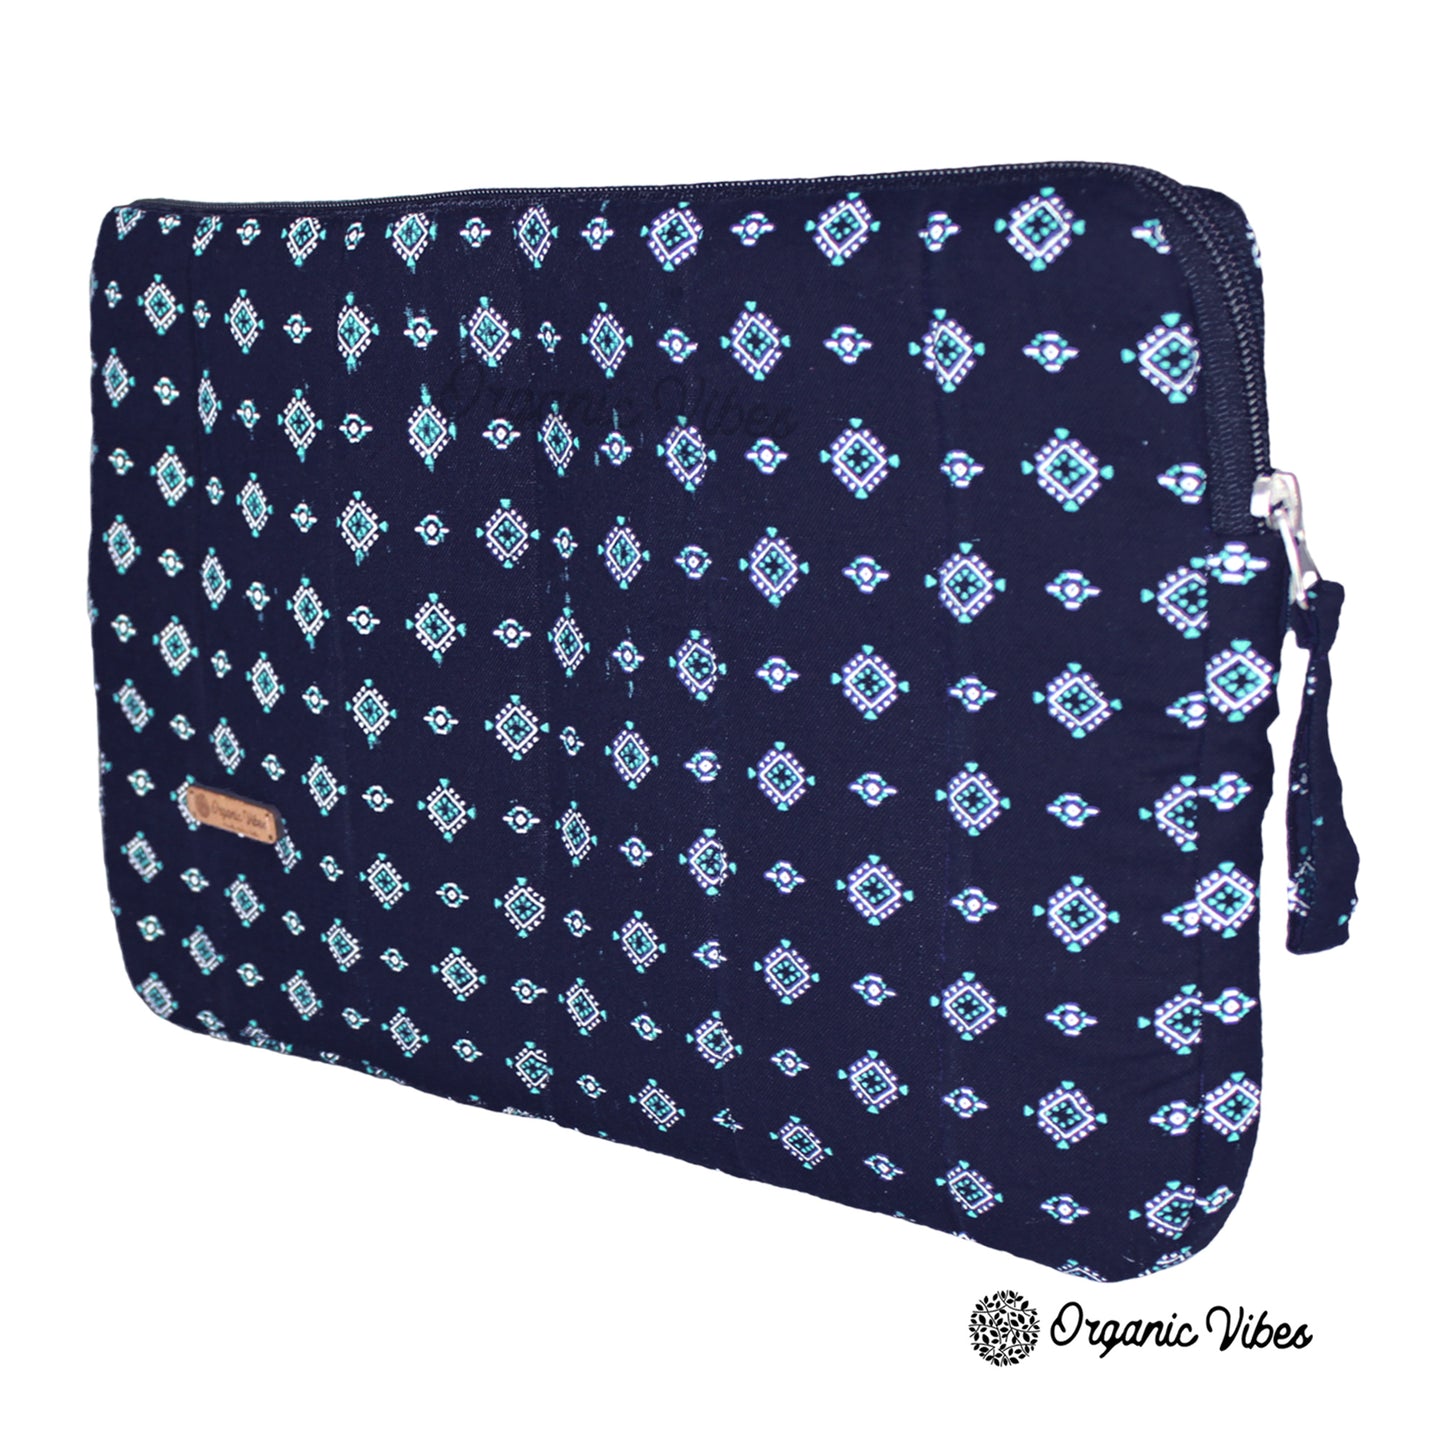 Organic Vibes Hand Block Blue Motifs Printed Laptop Sleeves for Laptop 13 Inches